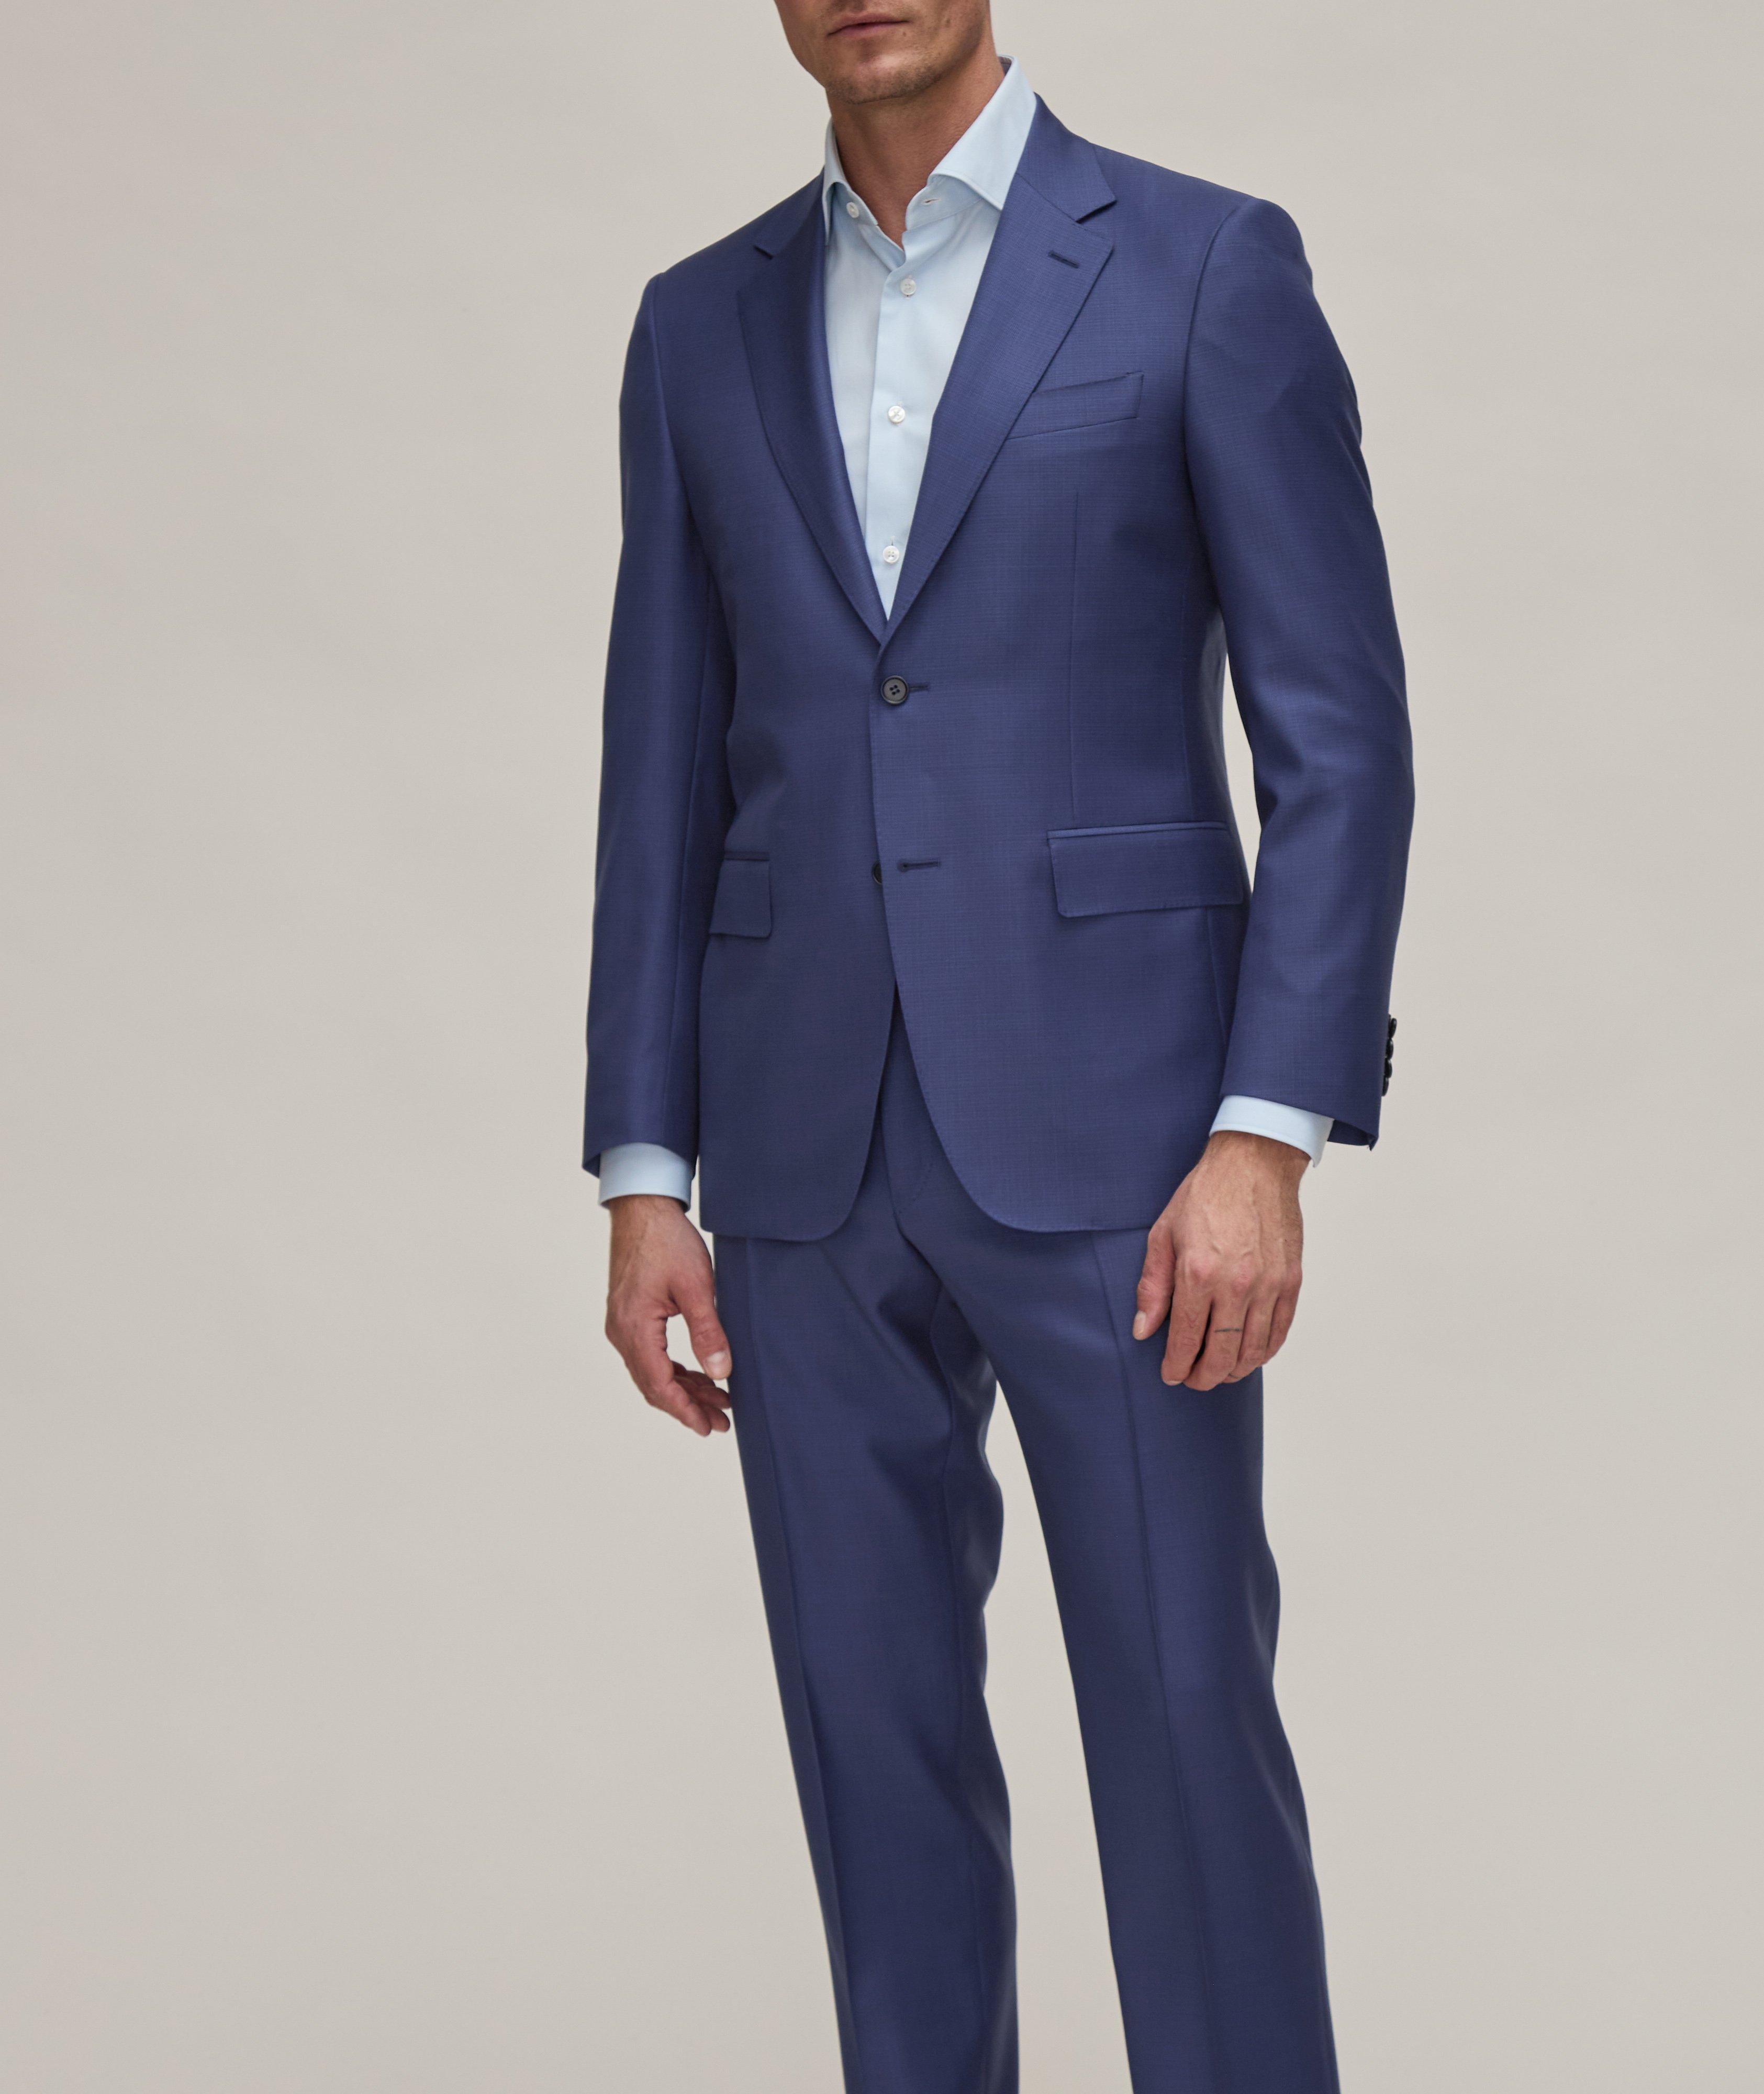 Contemporary-Fit Micro Neat Wool Suit image 1